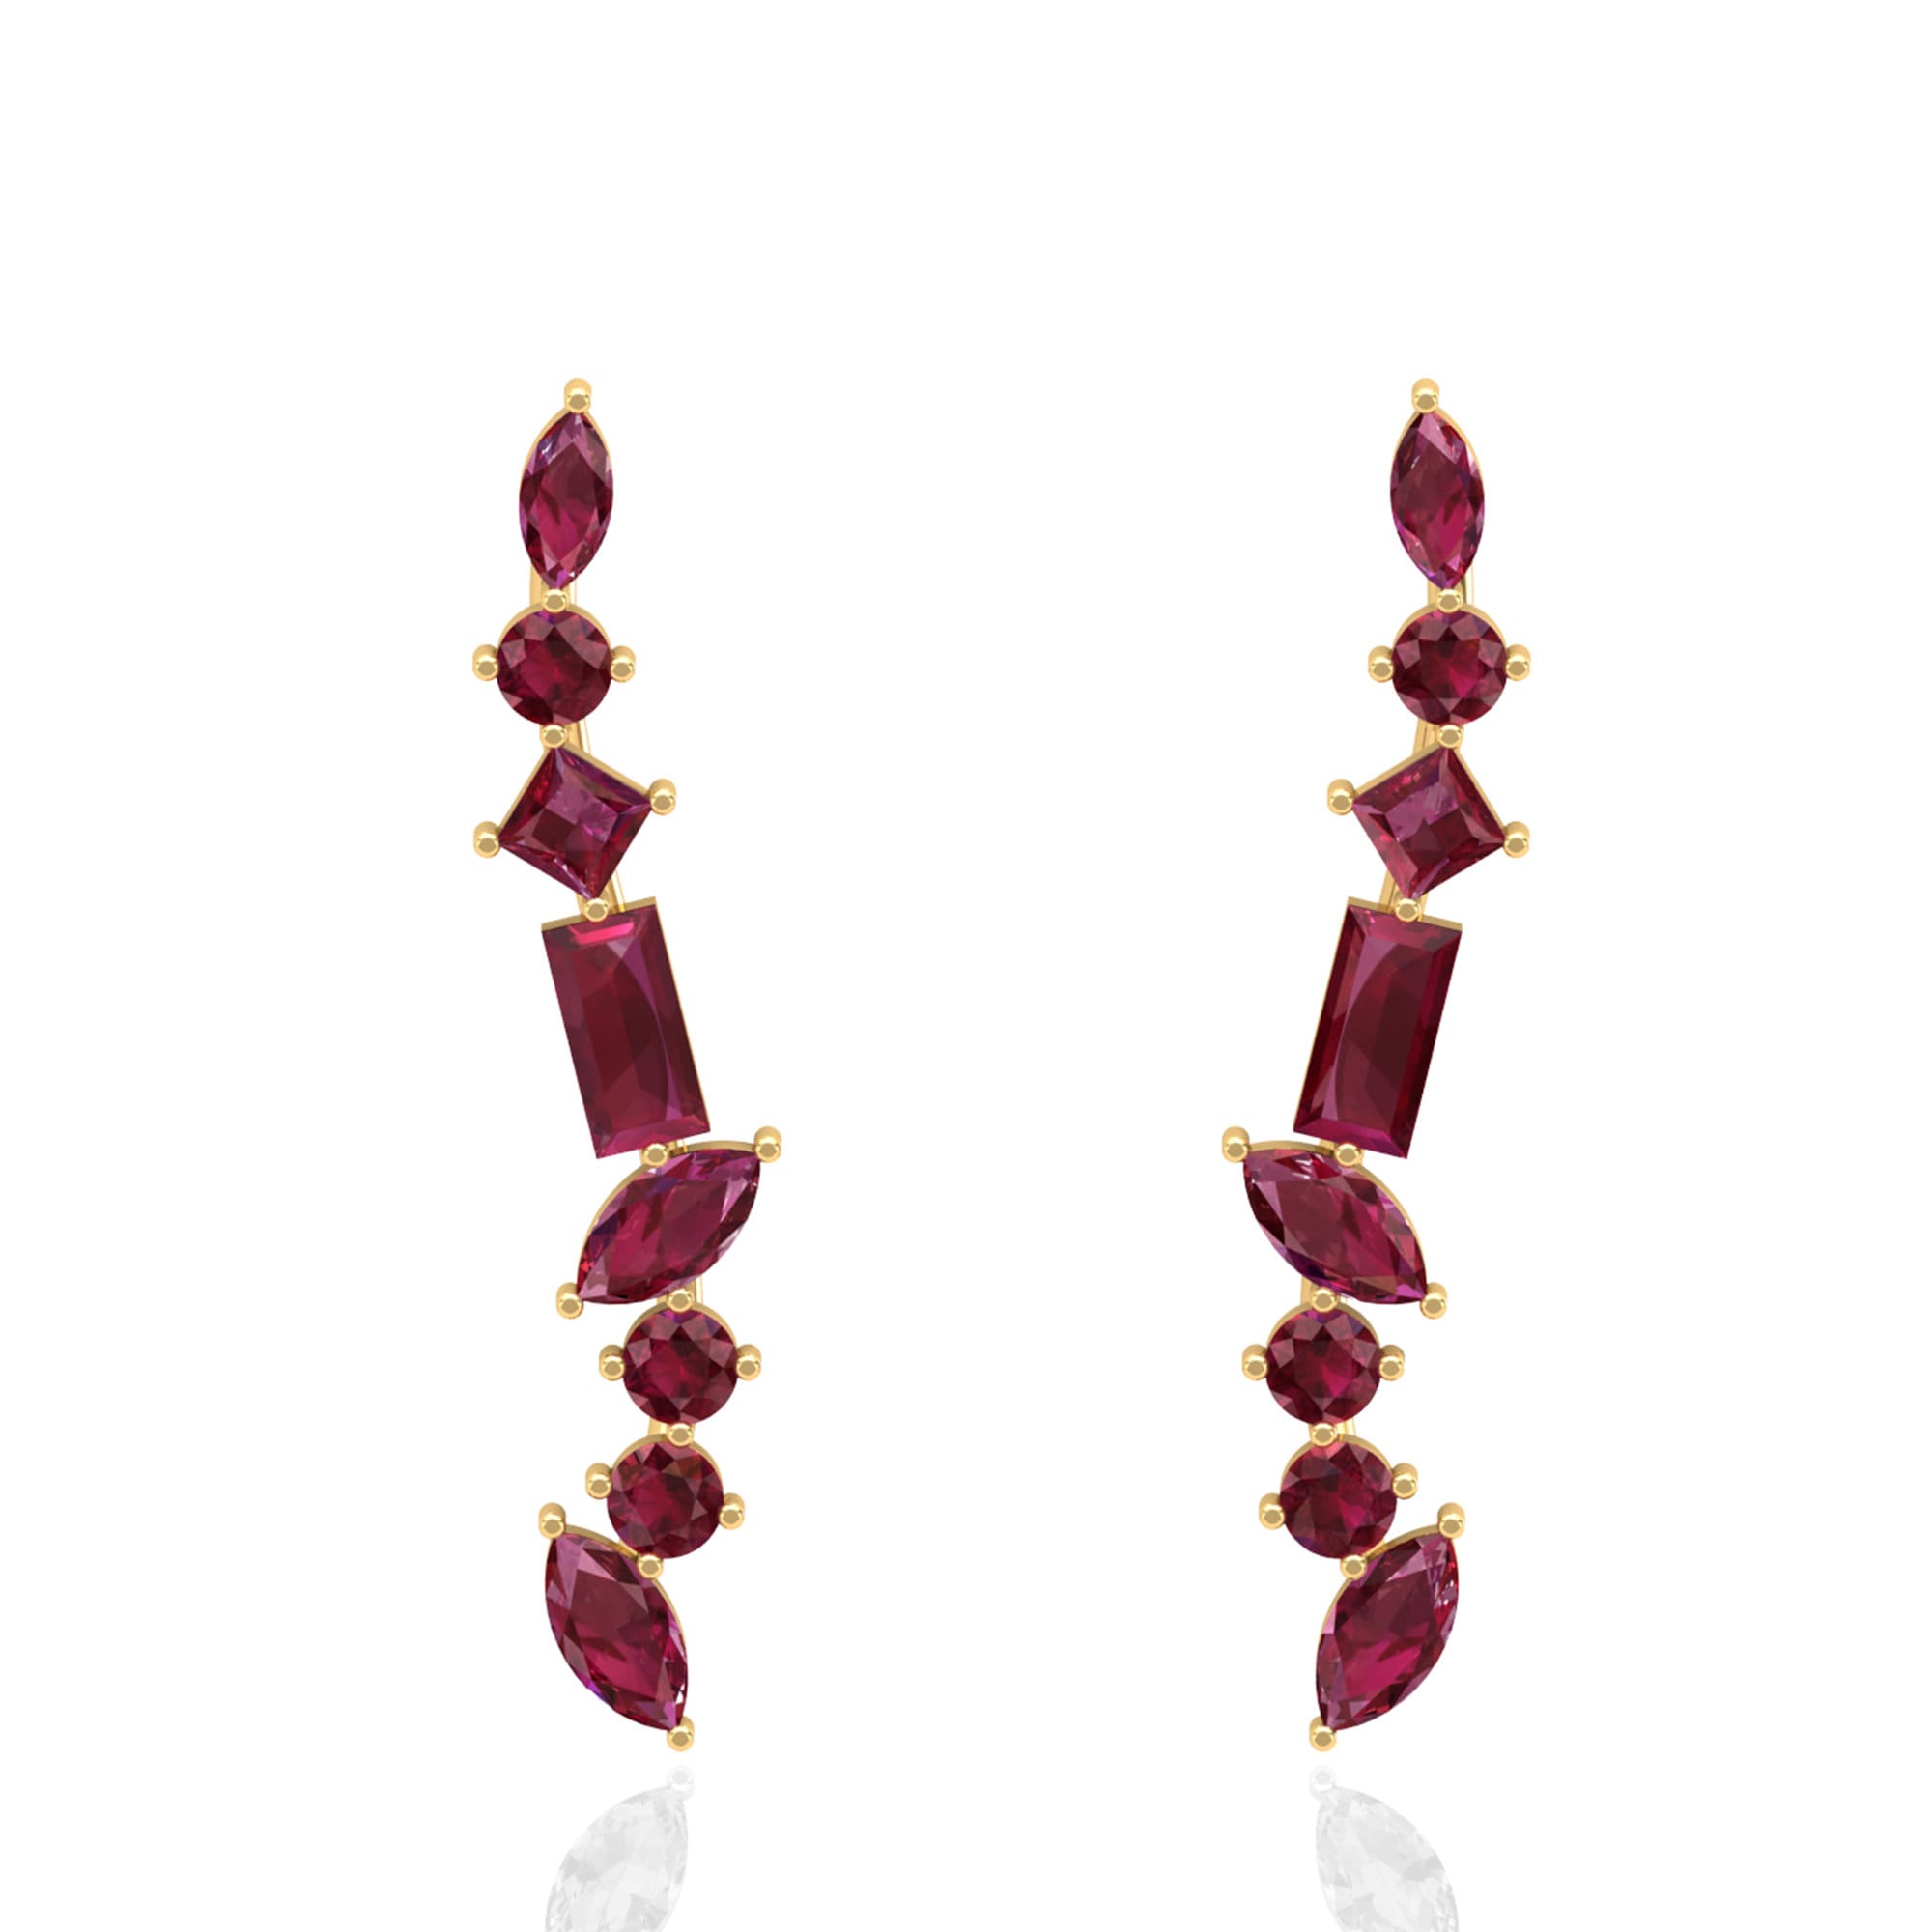 Ruby Cartilage Earrings, 16G Ear Climber, Marquise Curved Crawler, Piercing